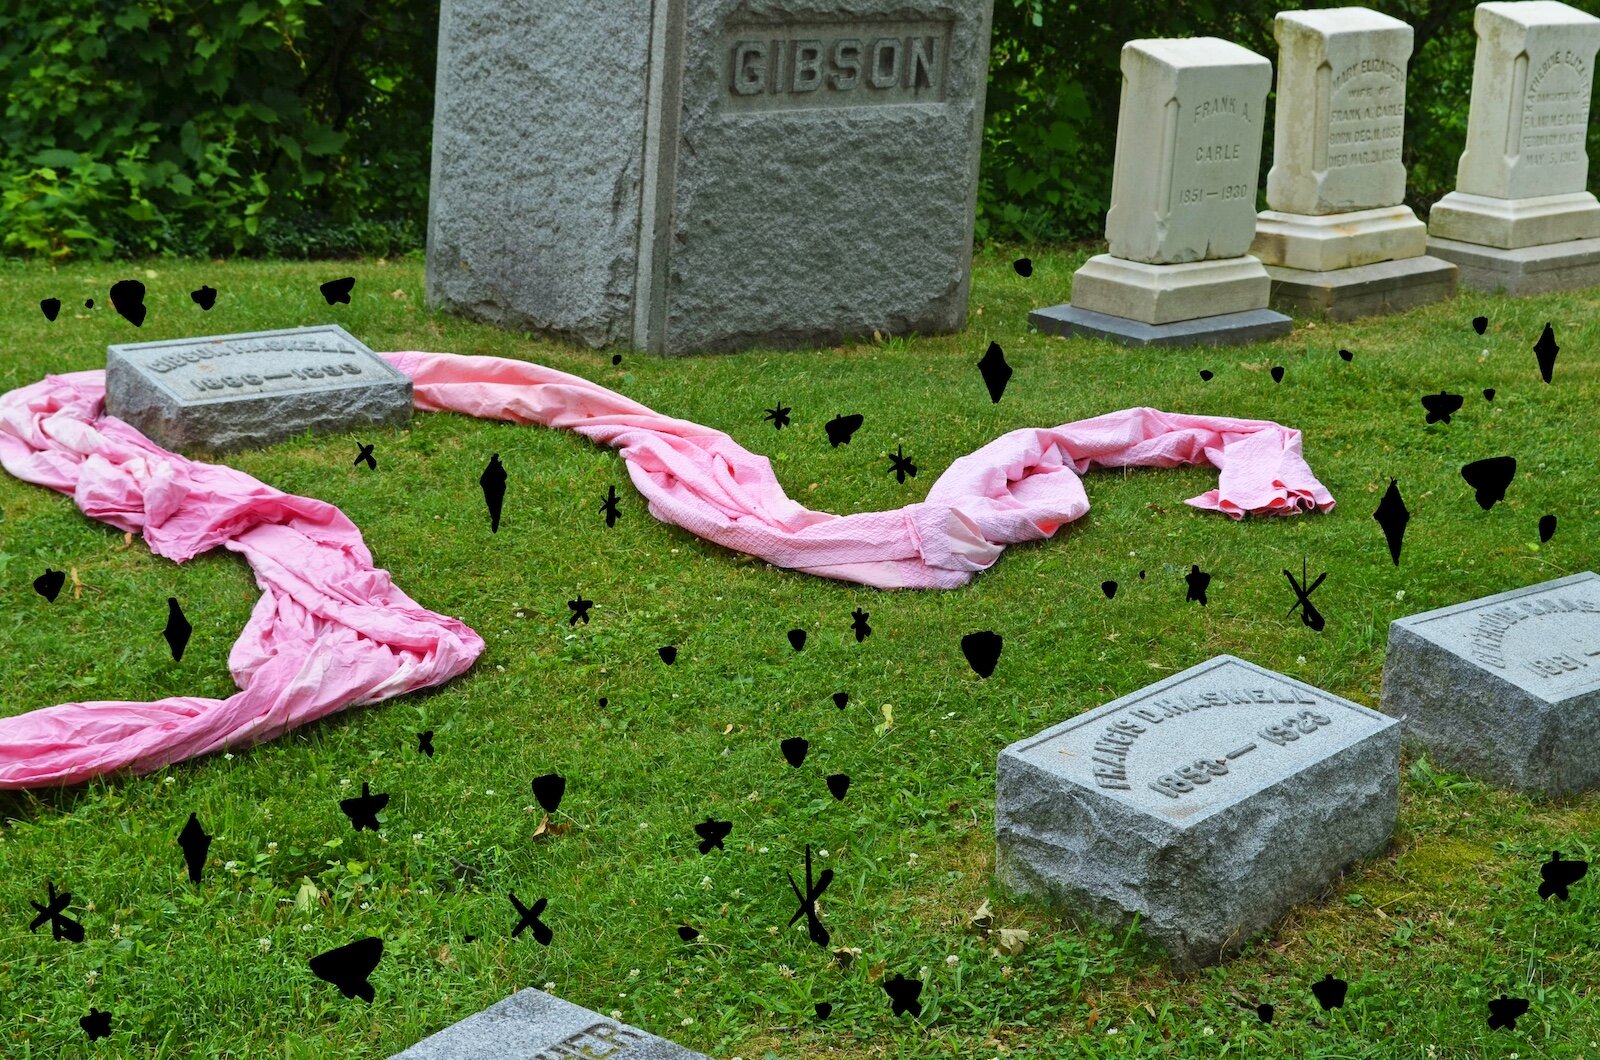 Photographs taken at Mountain Home Cemetery in Kalamazoo, using a long swath of donated white cloth dyed red and pink to connect the graves as a way of reflecting many faiths' belief that we are all truly interconnected and equal in death.